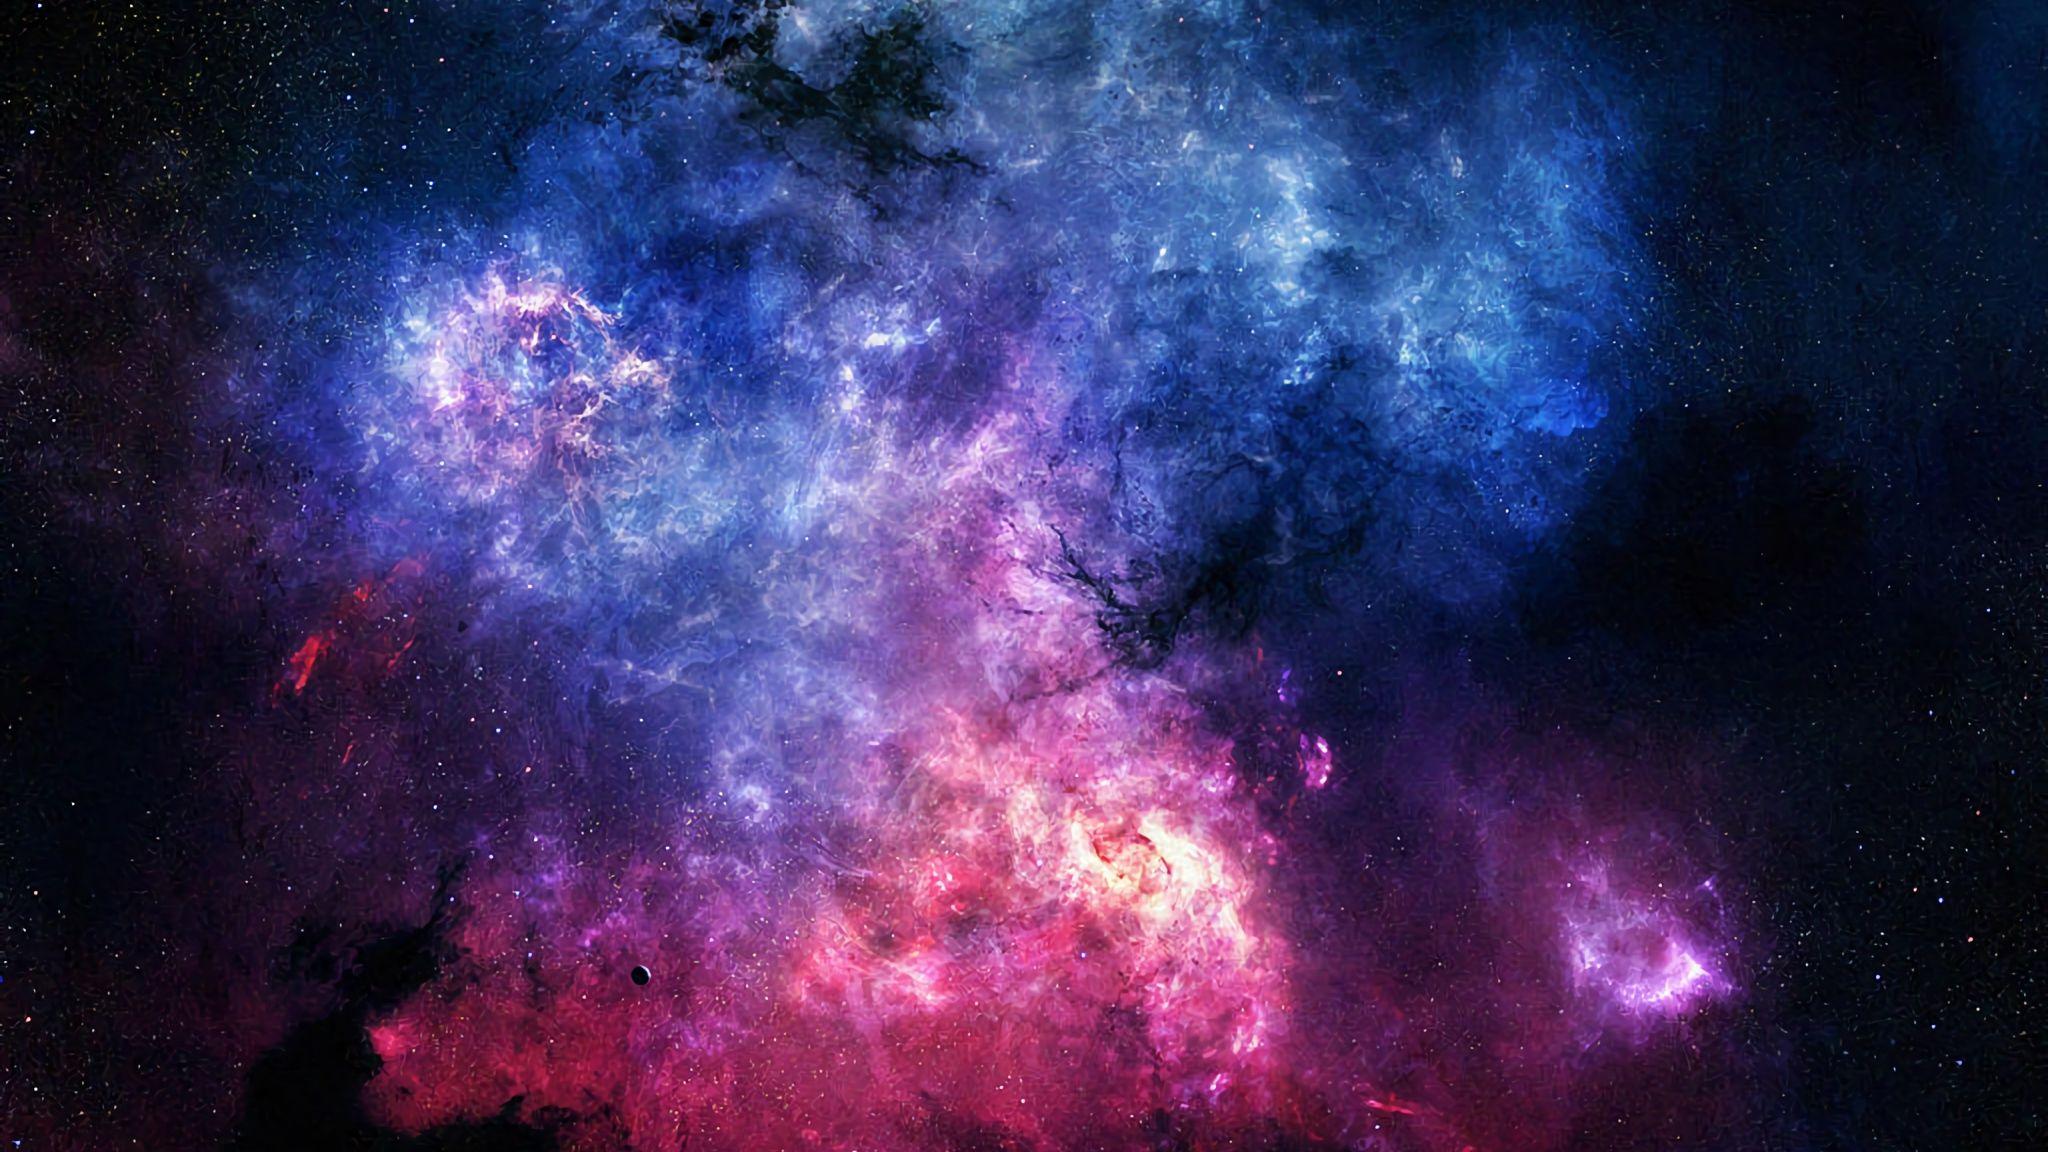 Galaxy Images 2048 X 1152